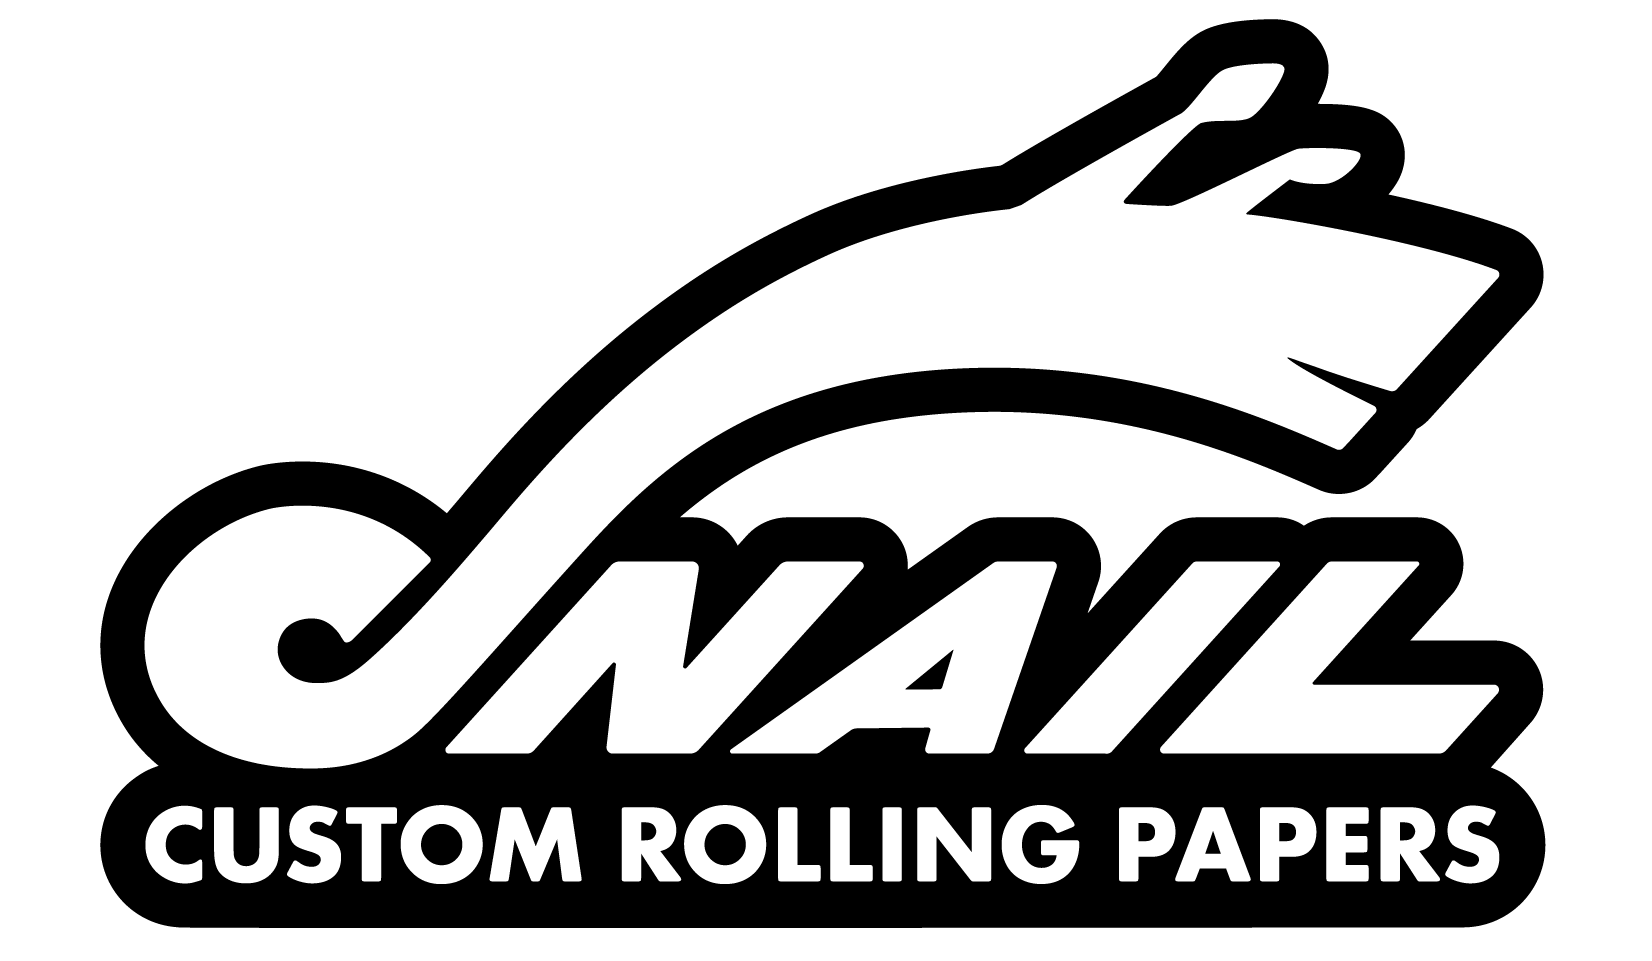 Snail Custom Rolling Papers